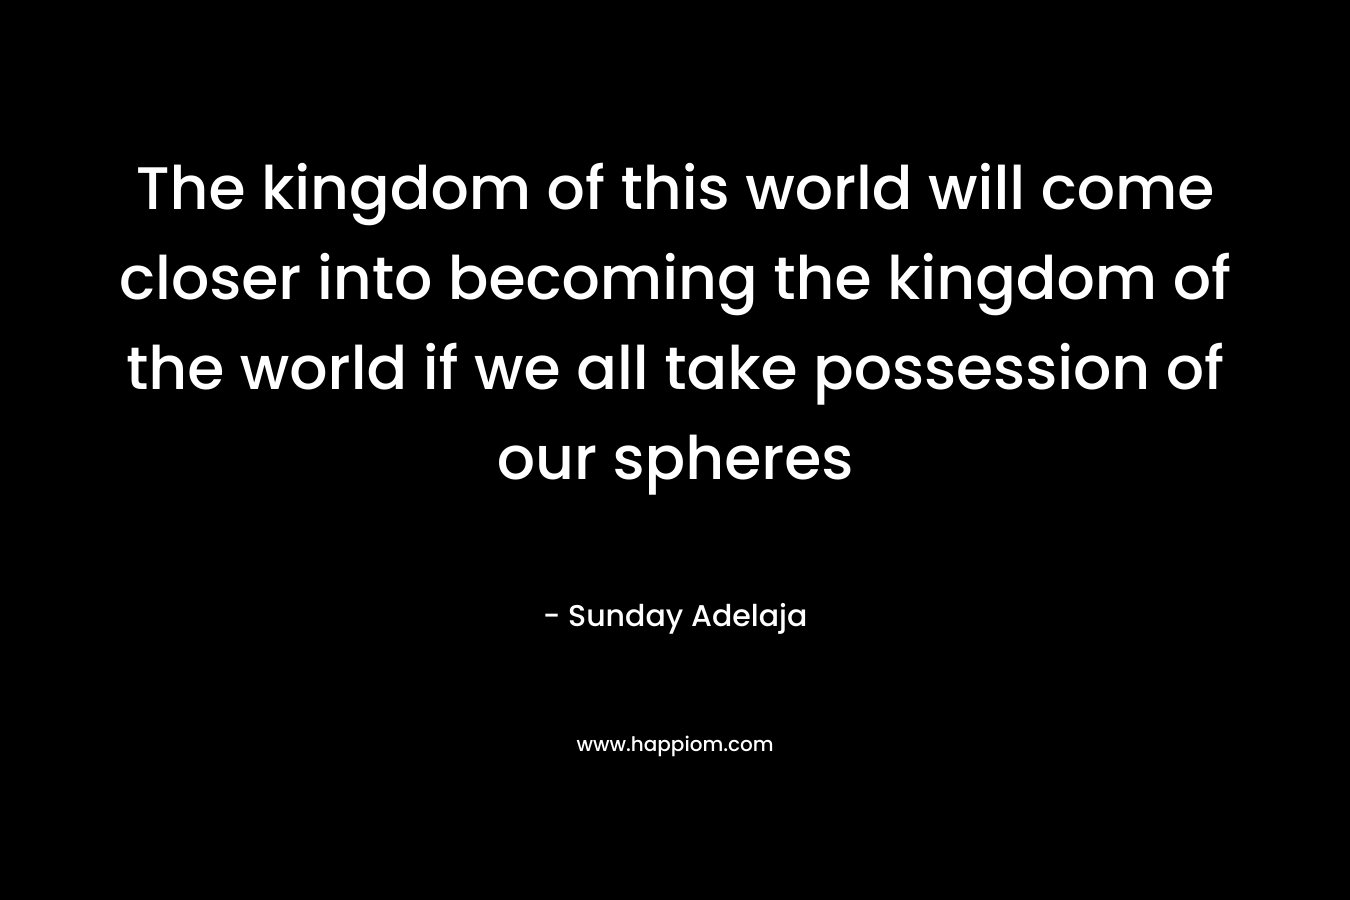 The kingdom of this world will come closer into becoming the kingdom of the world if we all take possession of our spheres